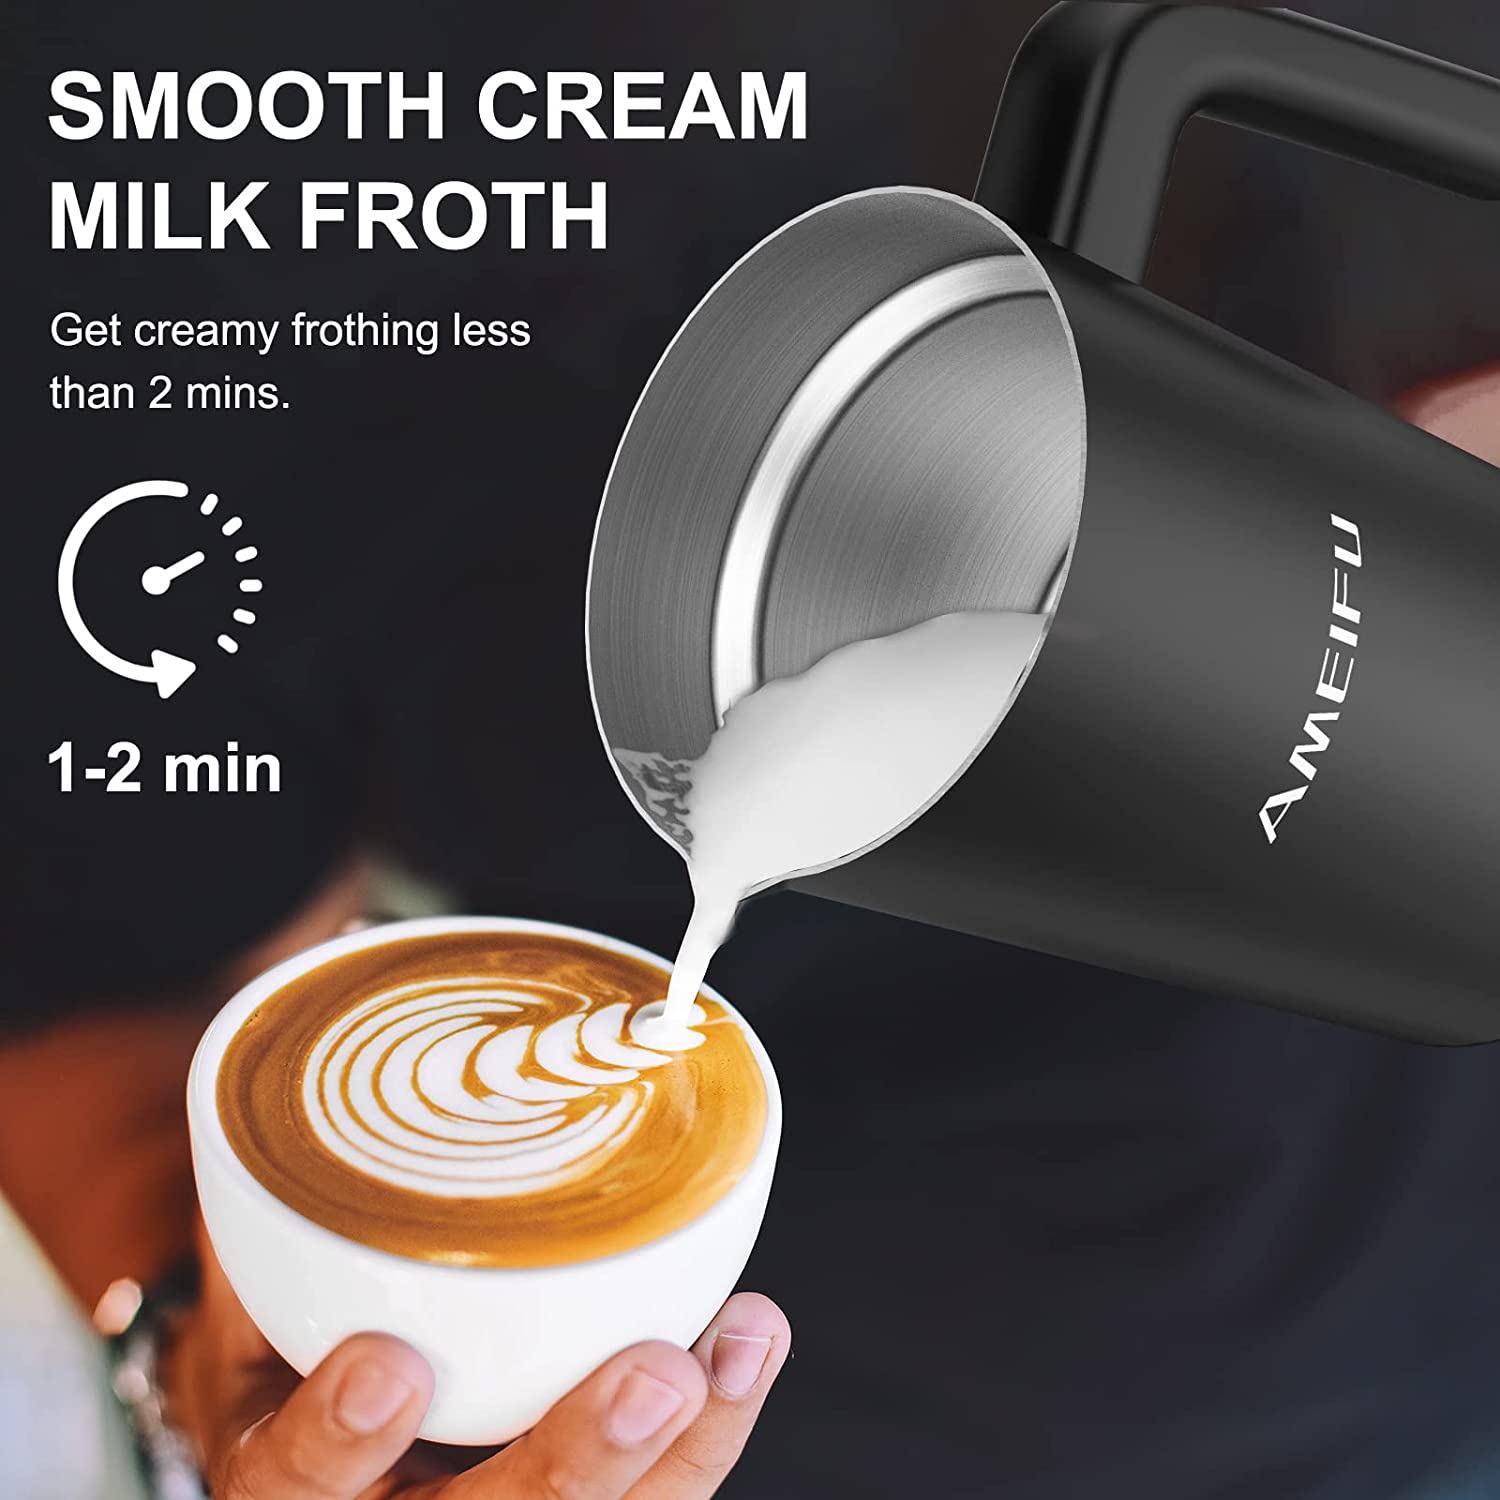 Milk Frother, Electric Milk Steamer, 10.1oz/300ml Automatic Hot & Cold –  Ameifu